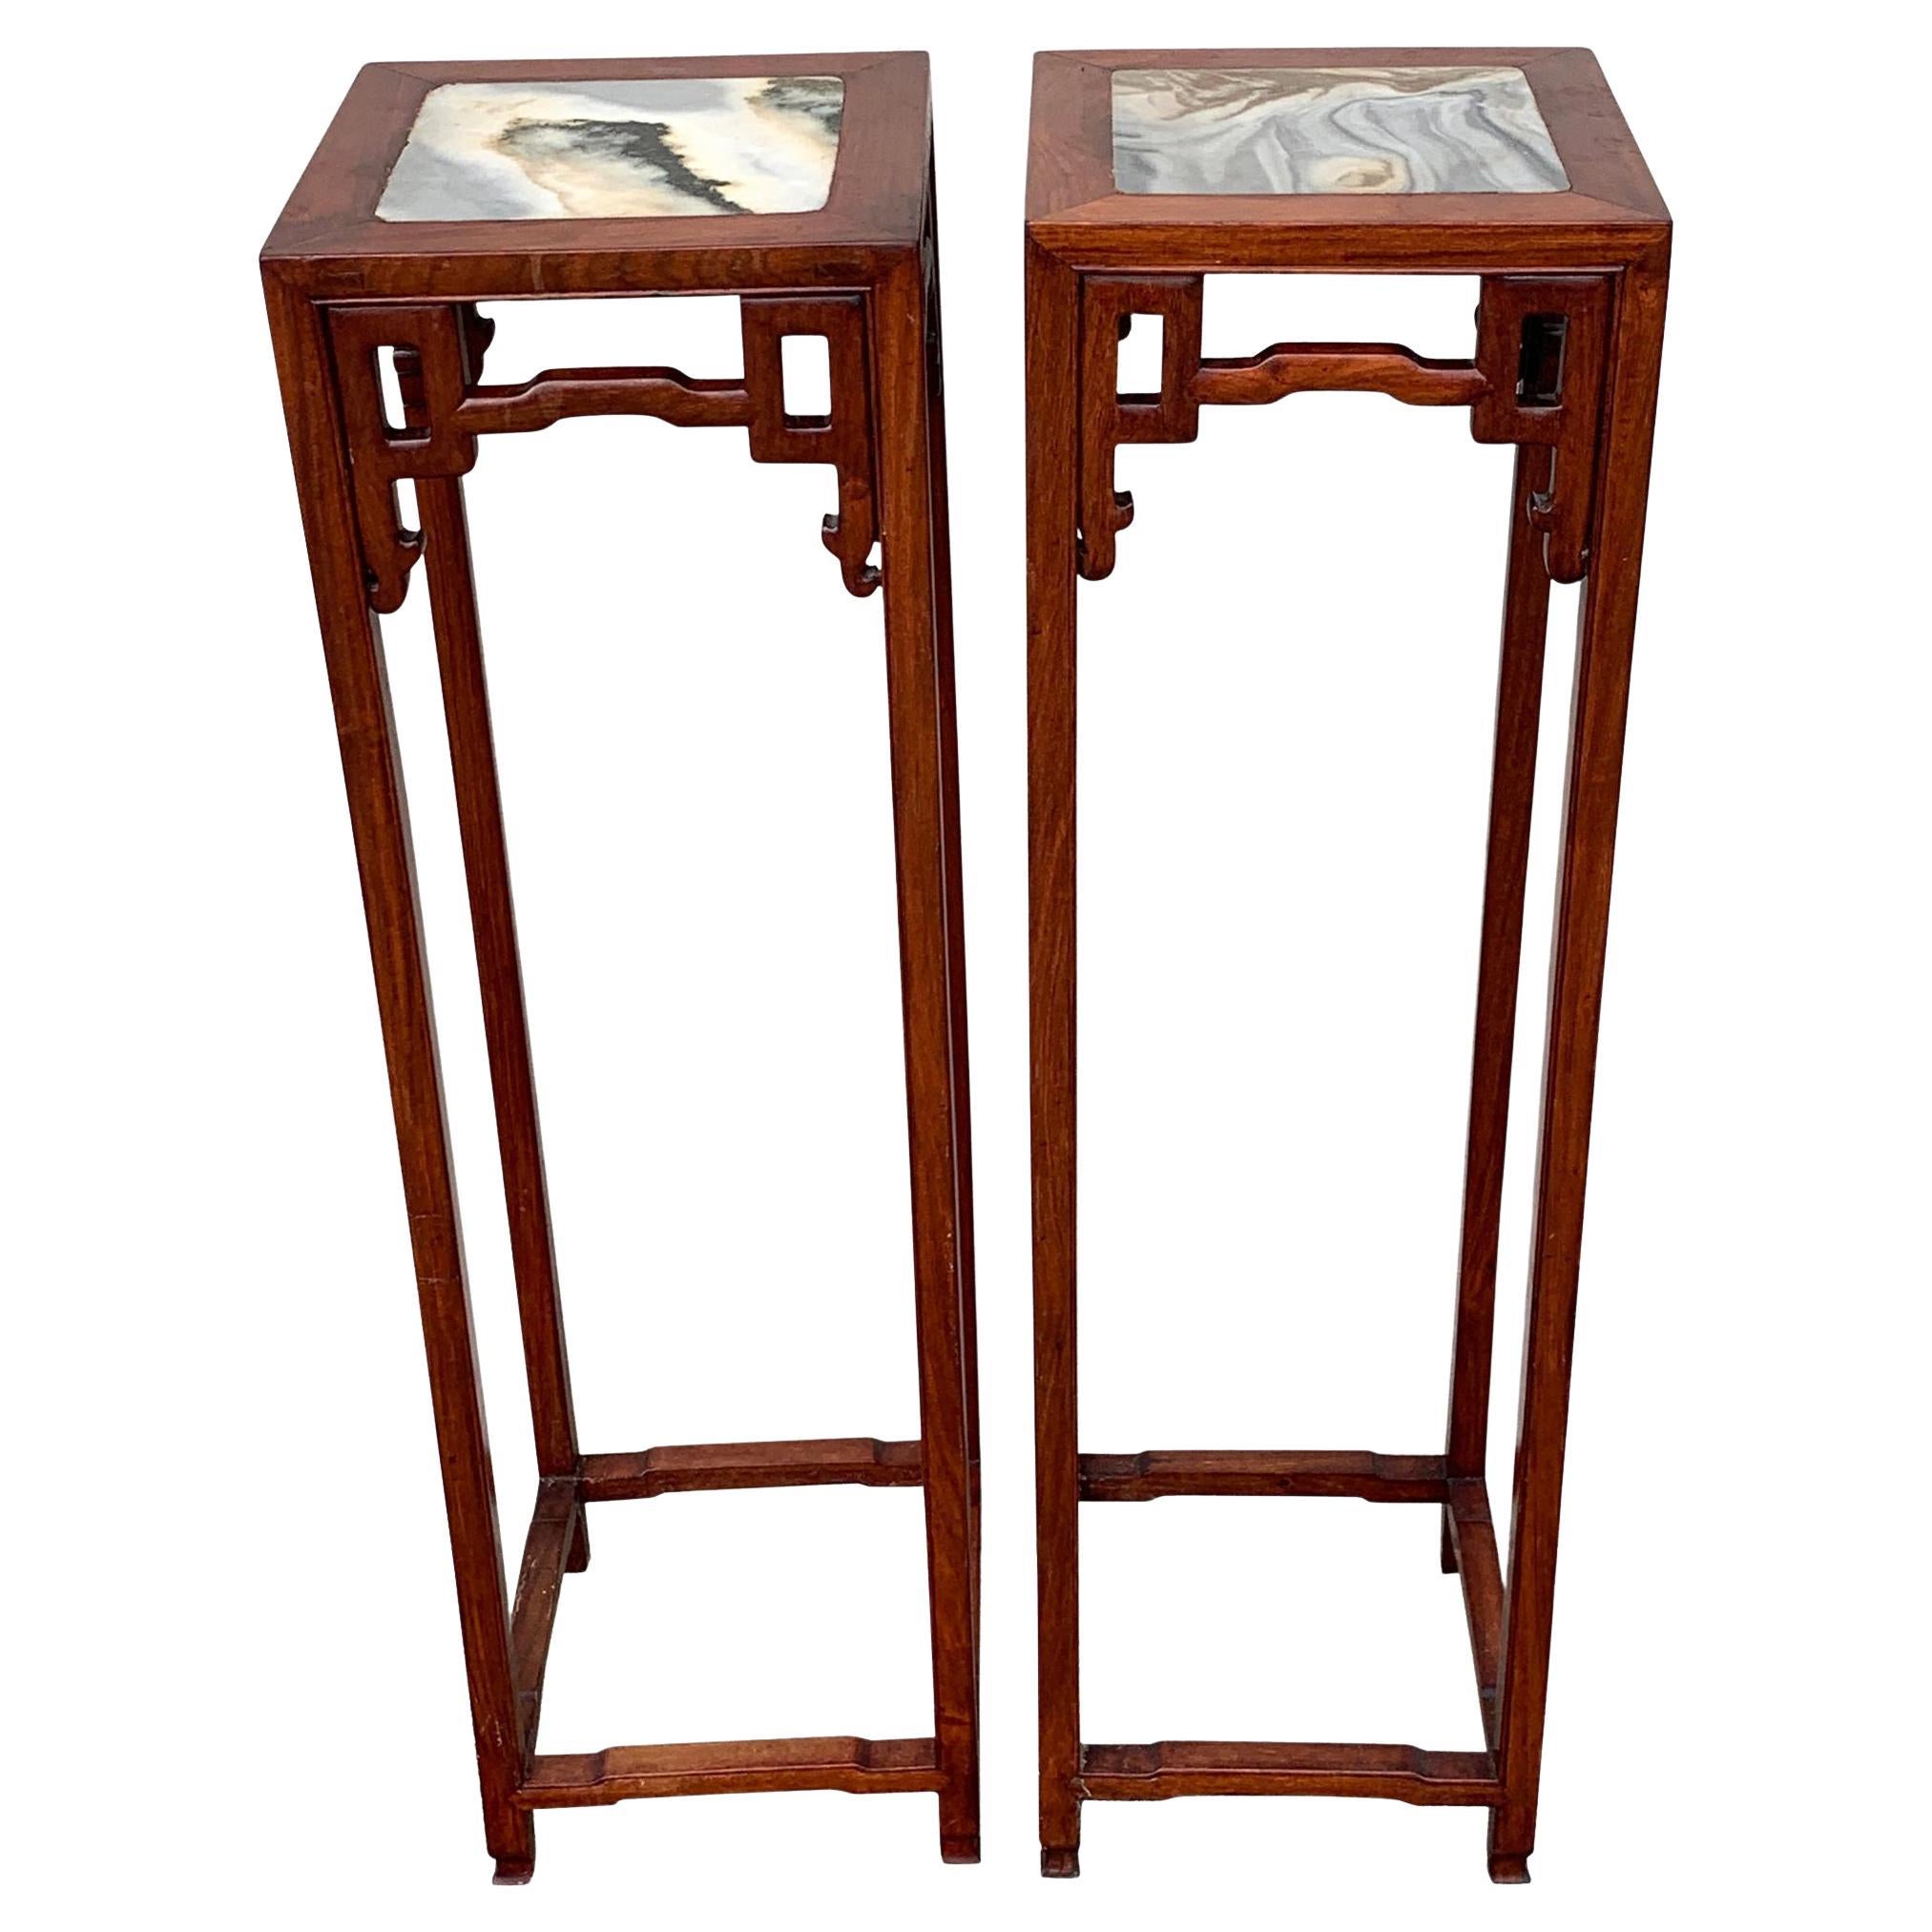 Pair of Chinese Export Hardwood and Marble Pedestals